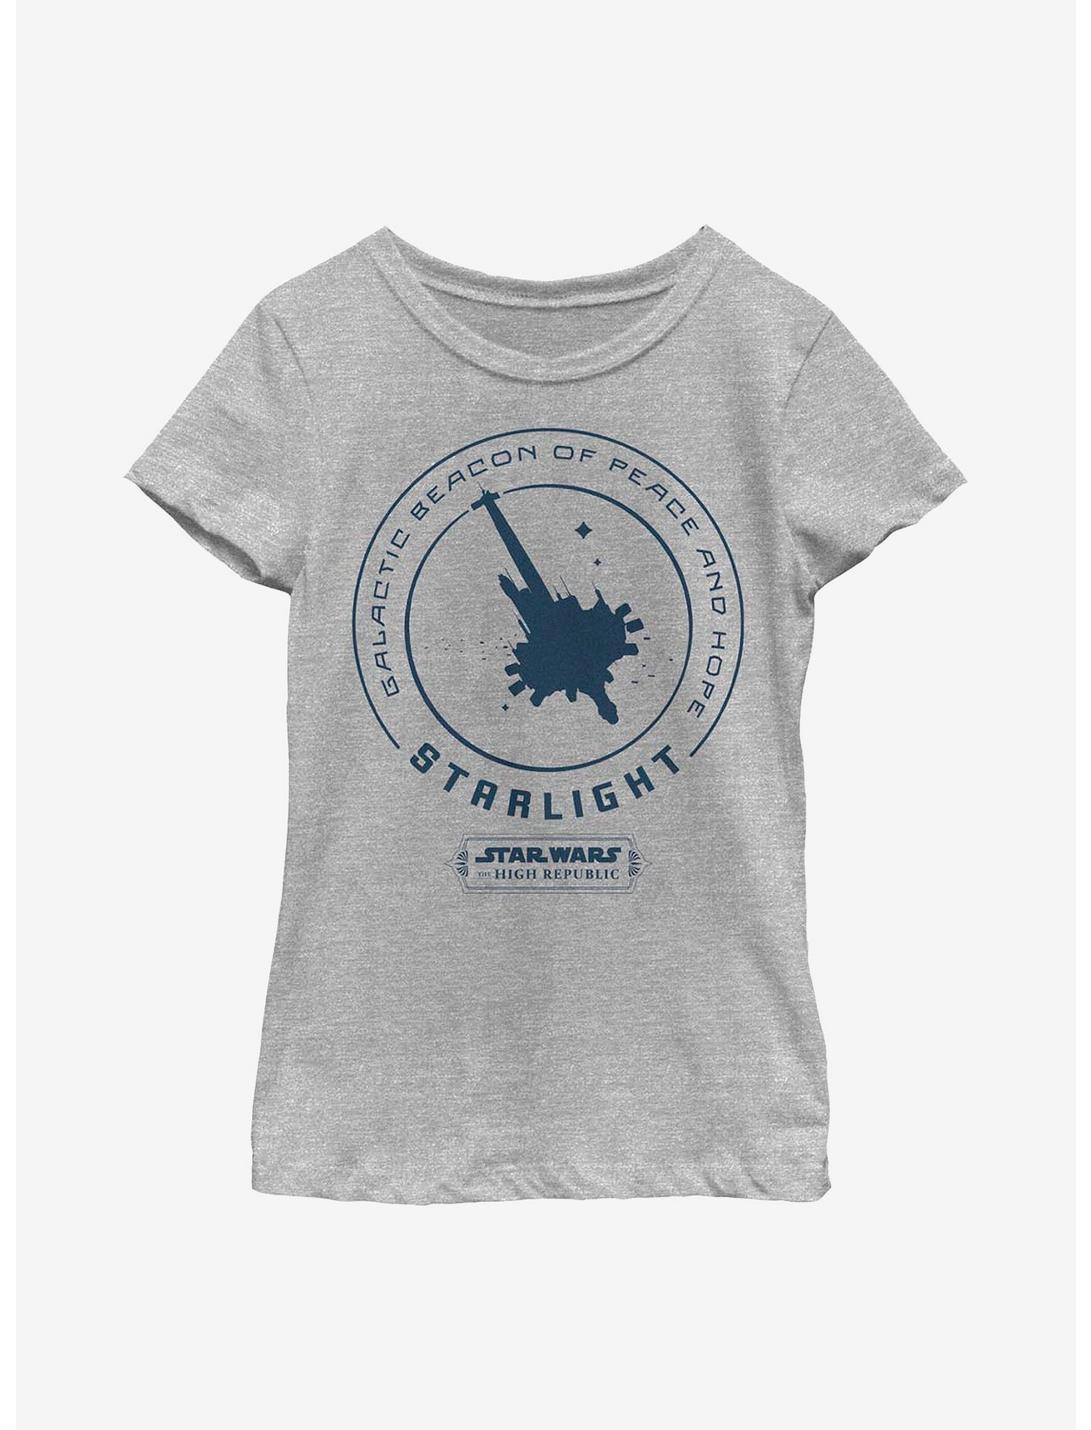 Star Wars: The High Republic Galactic Beacon Of Peace And Hope Youth Girls T-Shirt, ATH HTR, hi-res